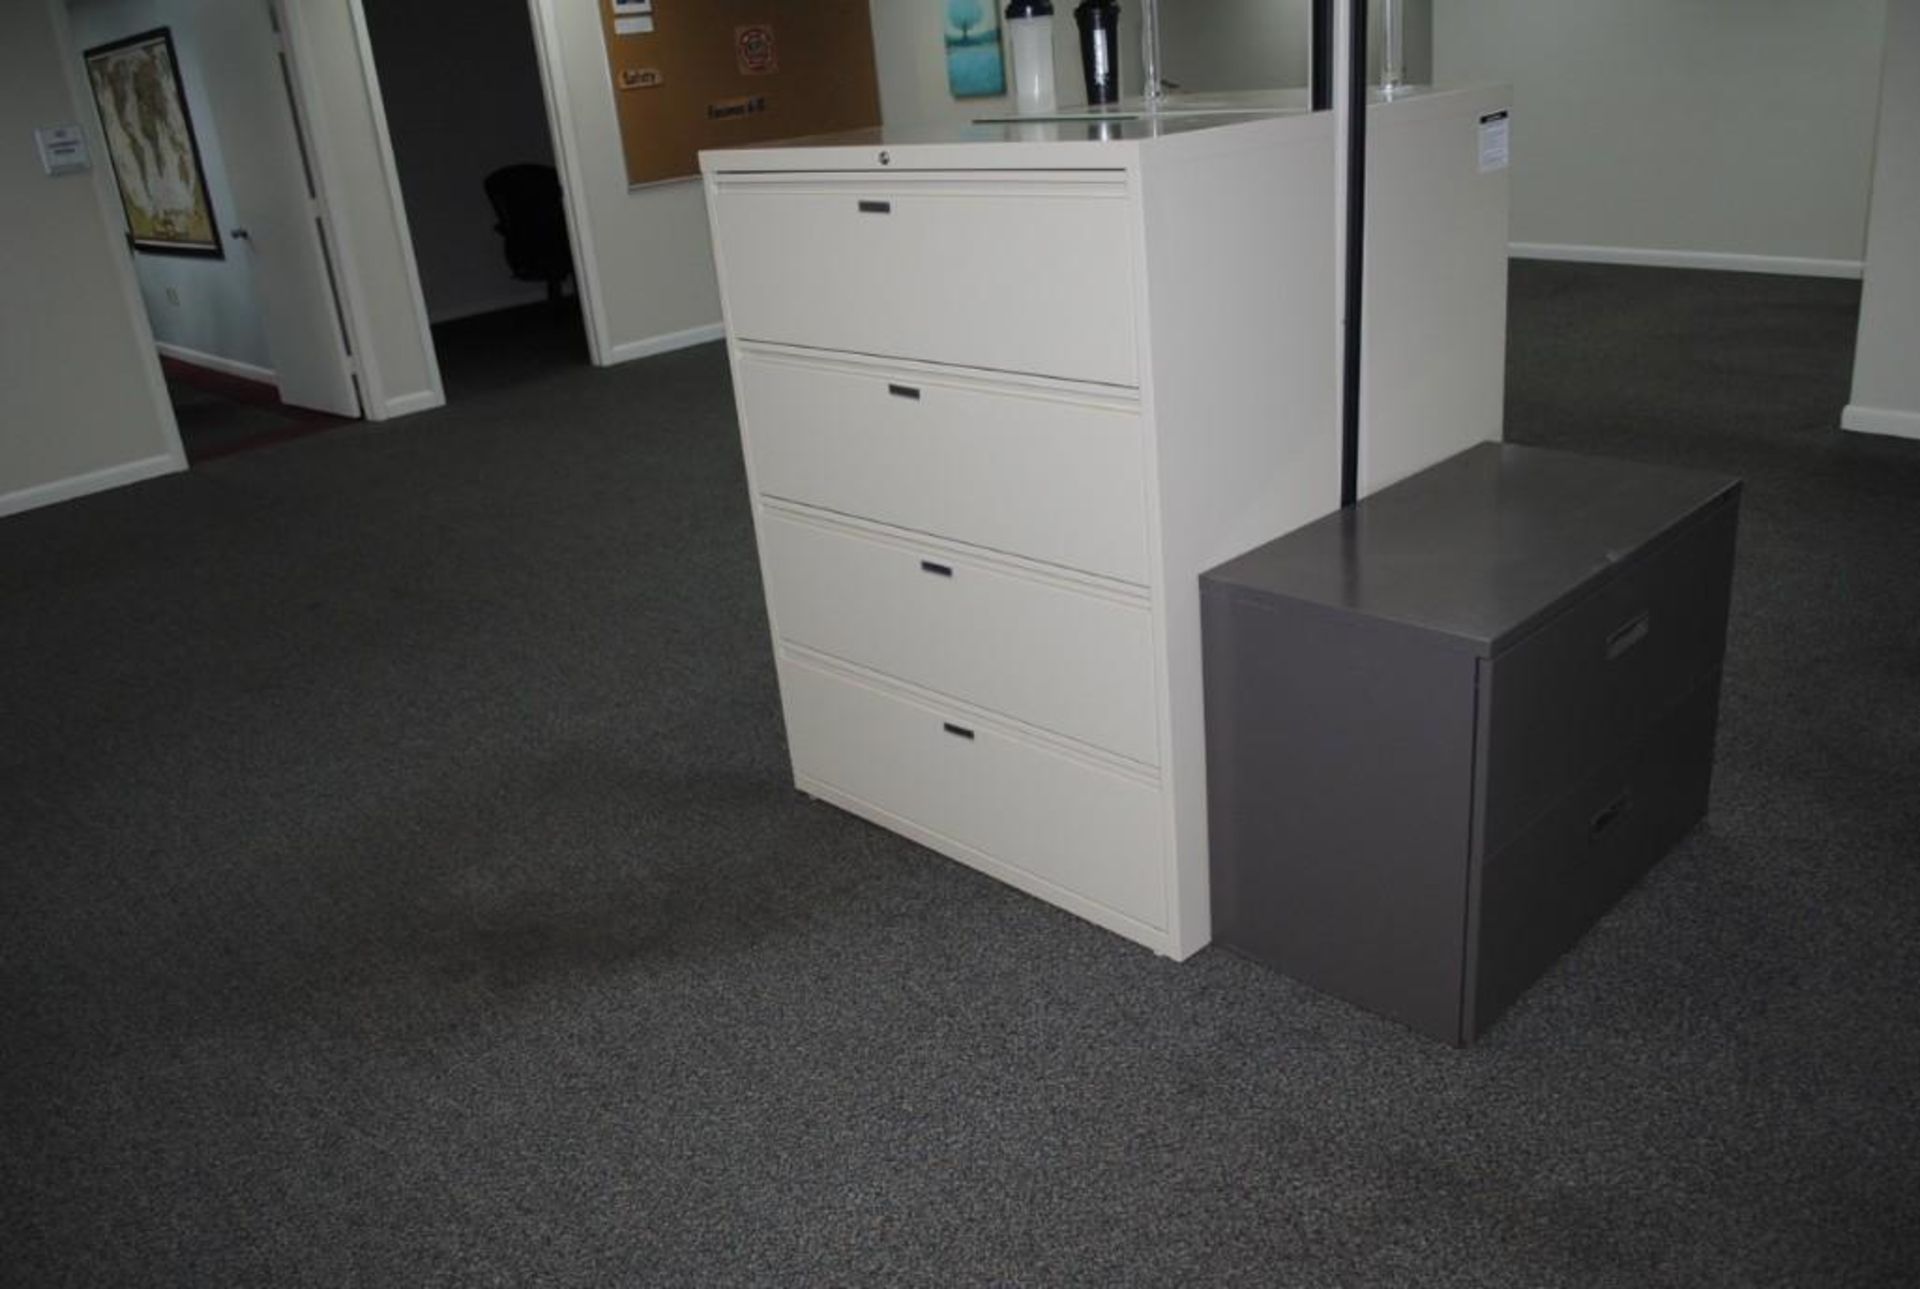 Furniture of Main Office - Image 13 of 13